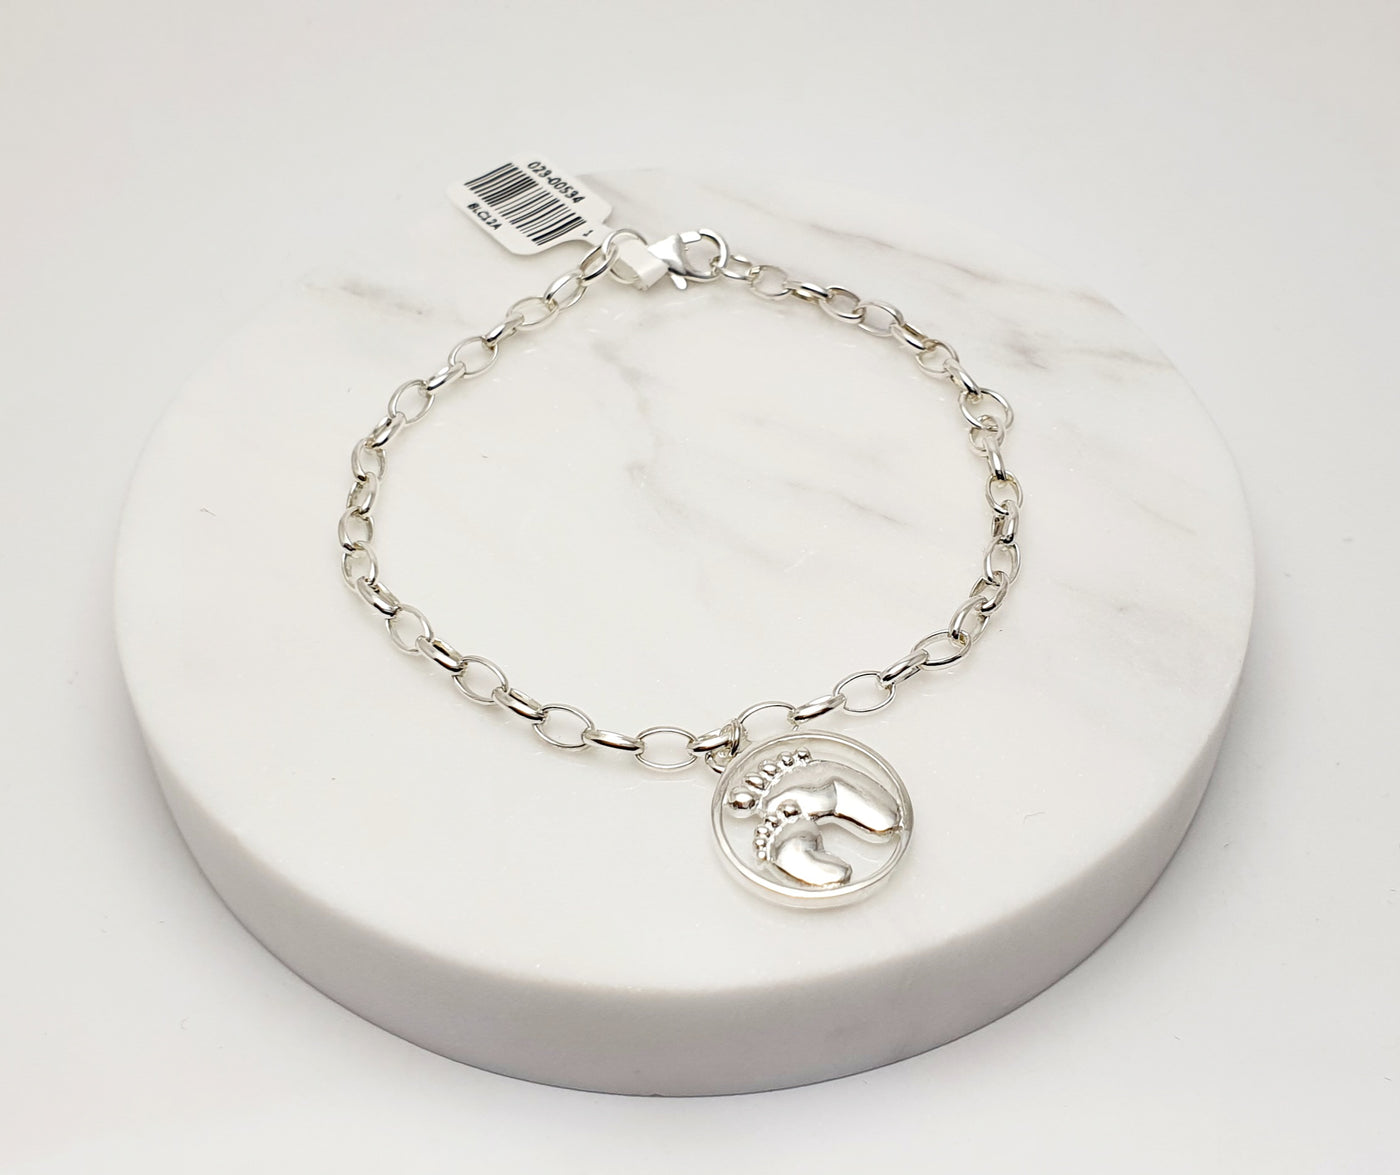 STERLING SILVER BRACELET WITH FOOTPRINT CHARM